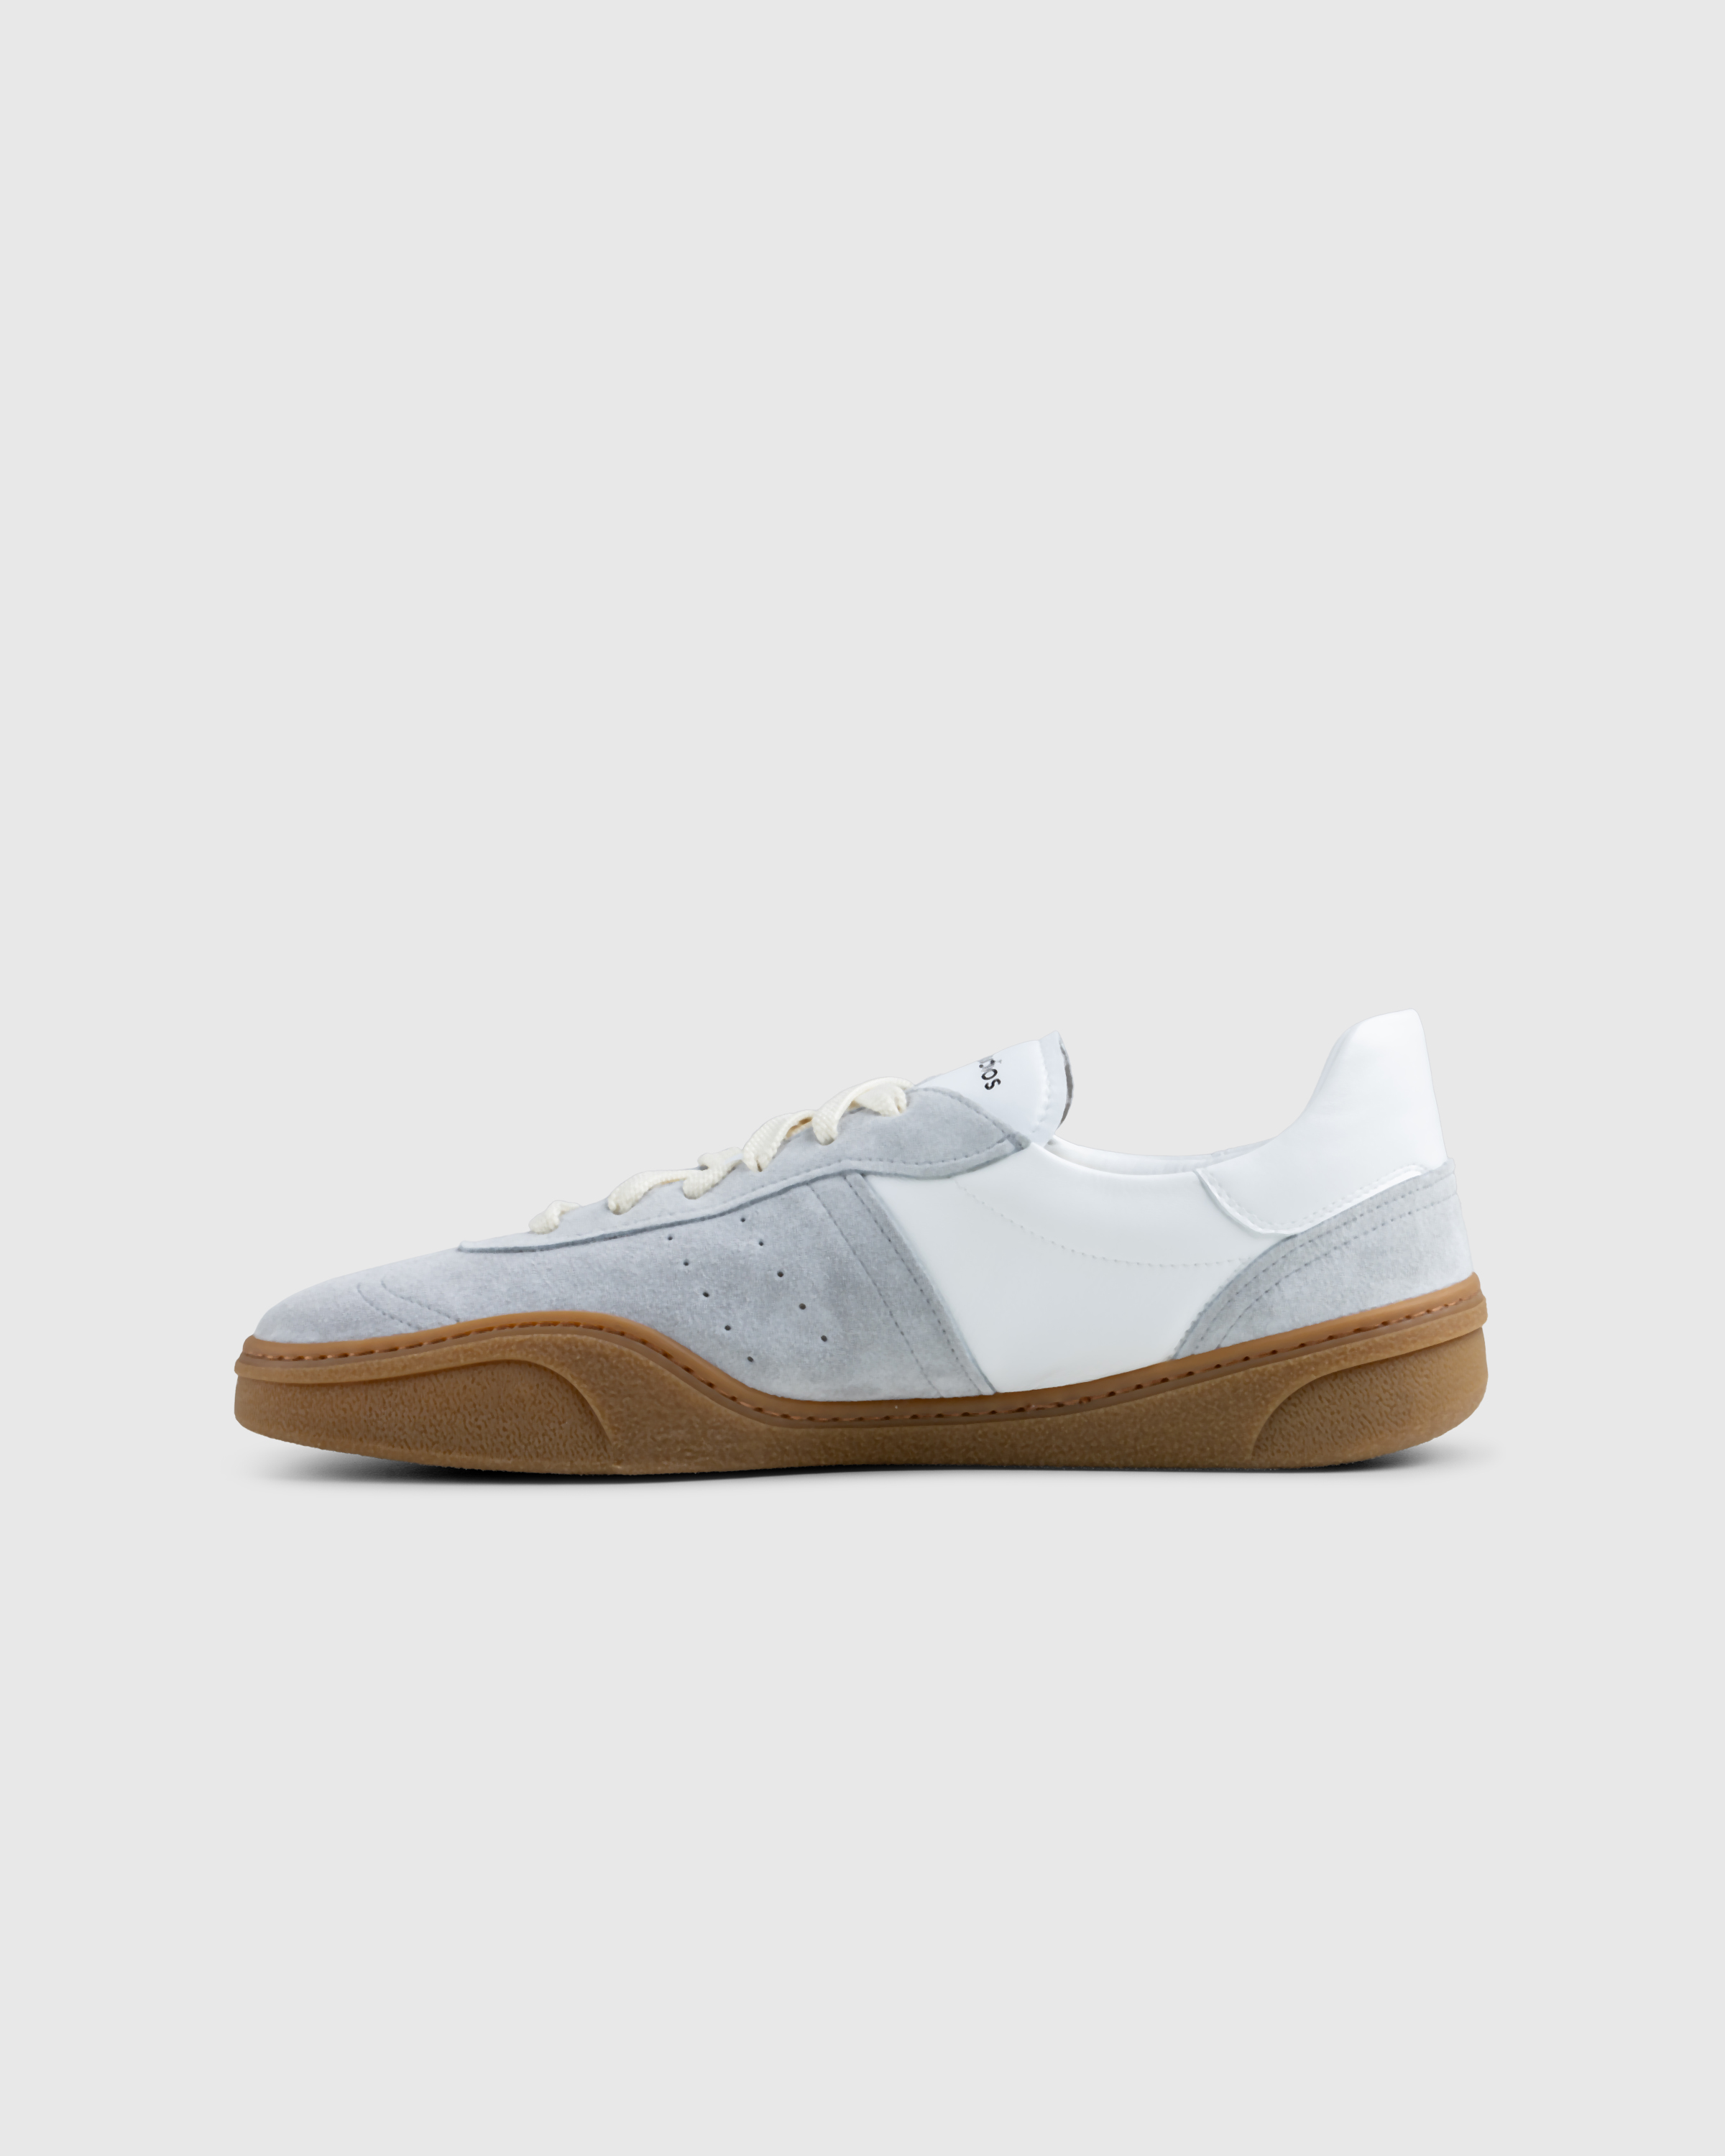 Acne Studios – Lace-Up Sneakers White/Brown - Low Top Sneakers - White - Image 2